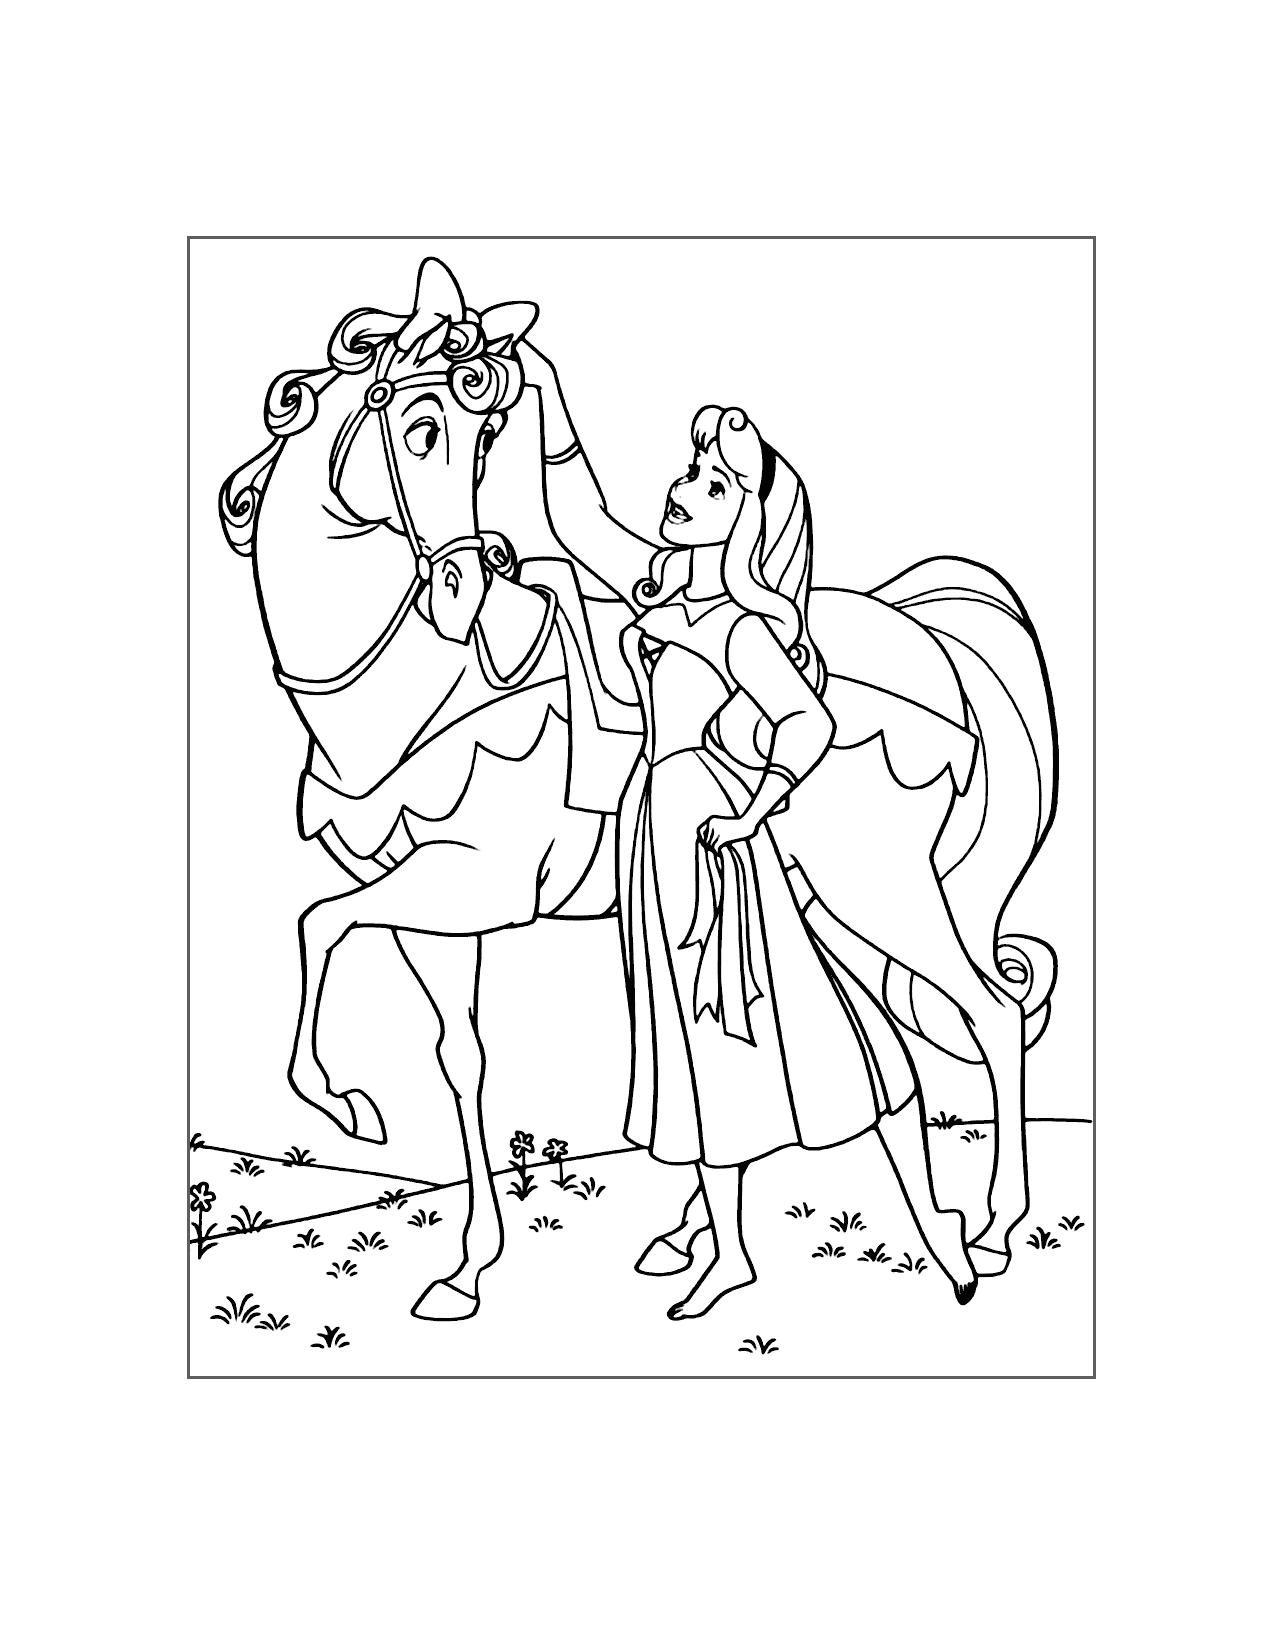 Princess Aurora Puts A Bow On Samson The Horse Coloring Page